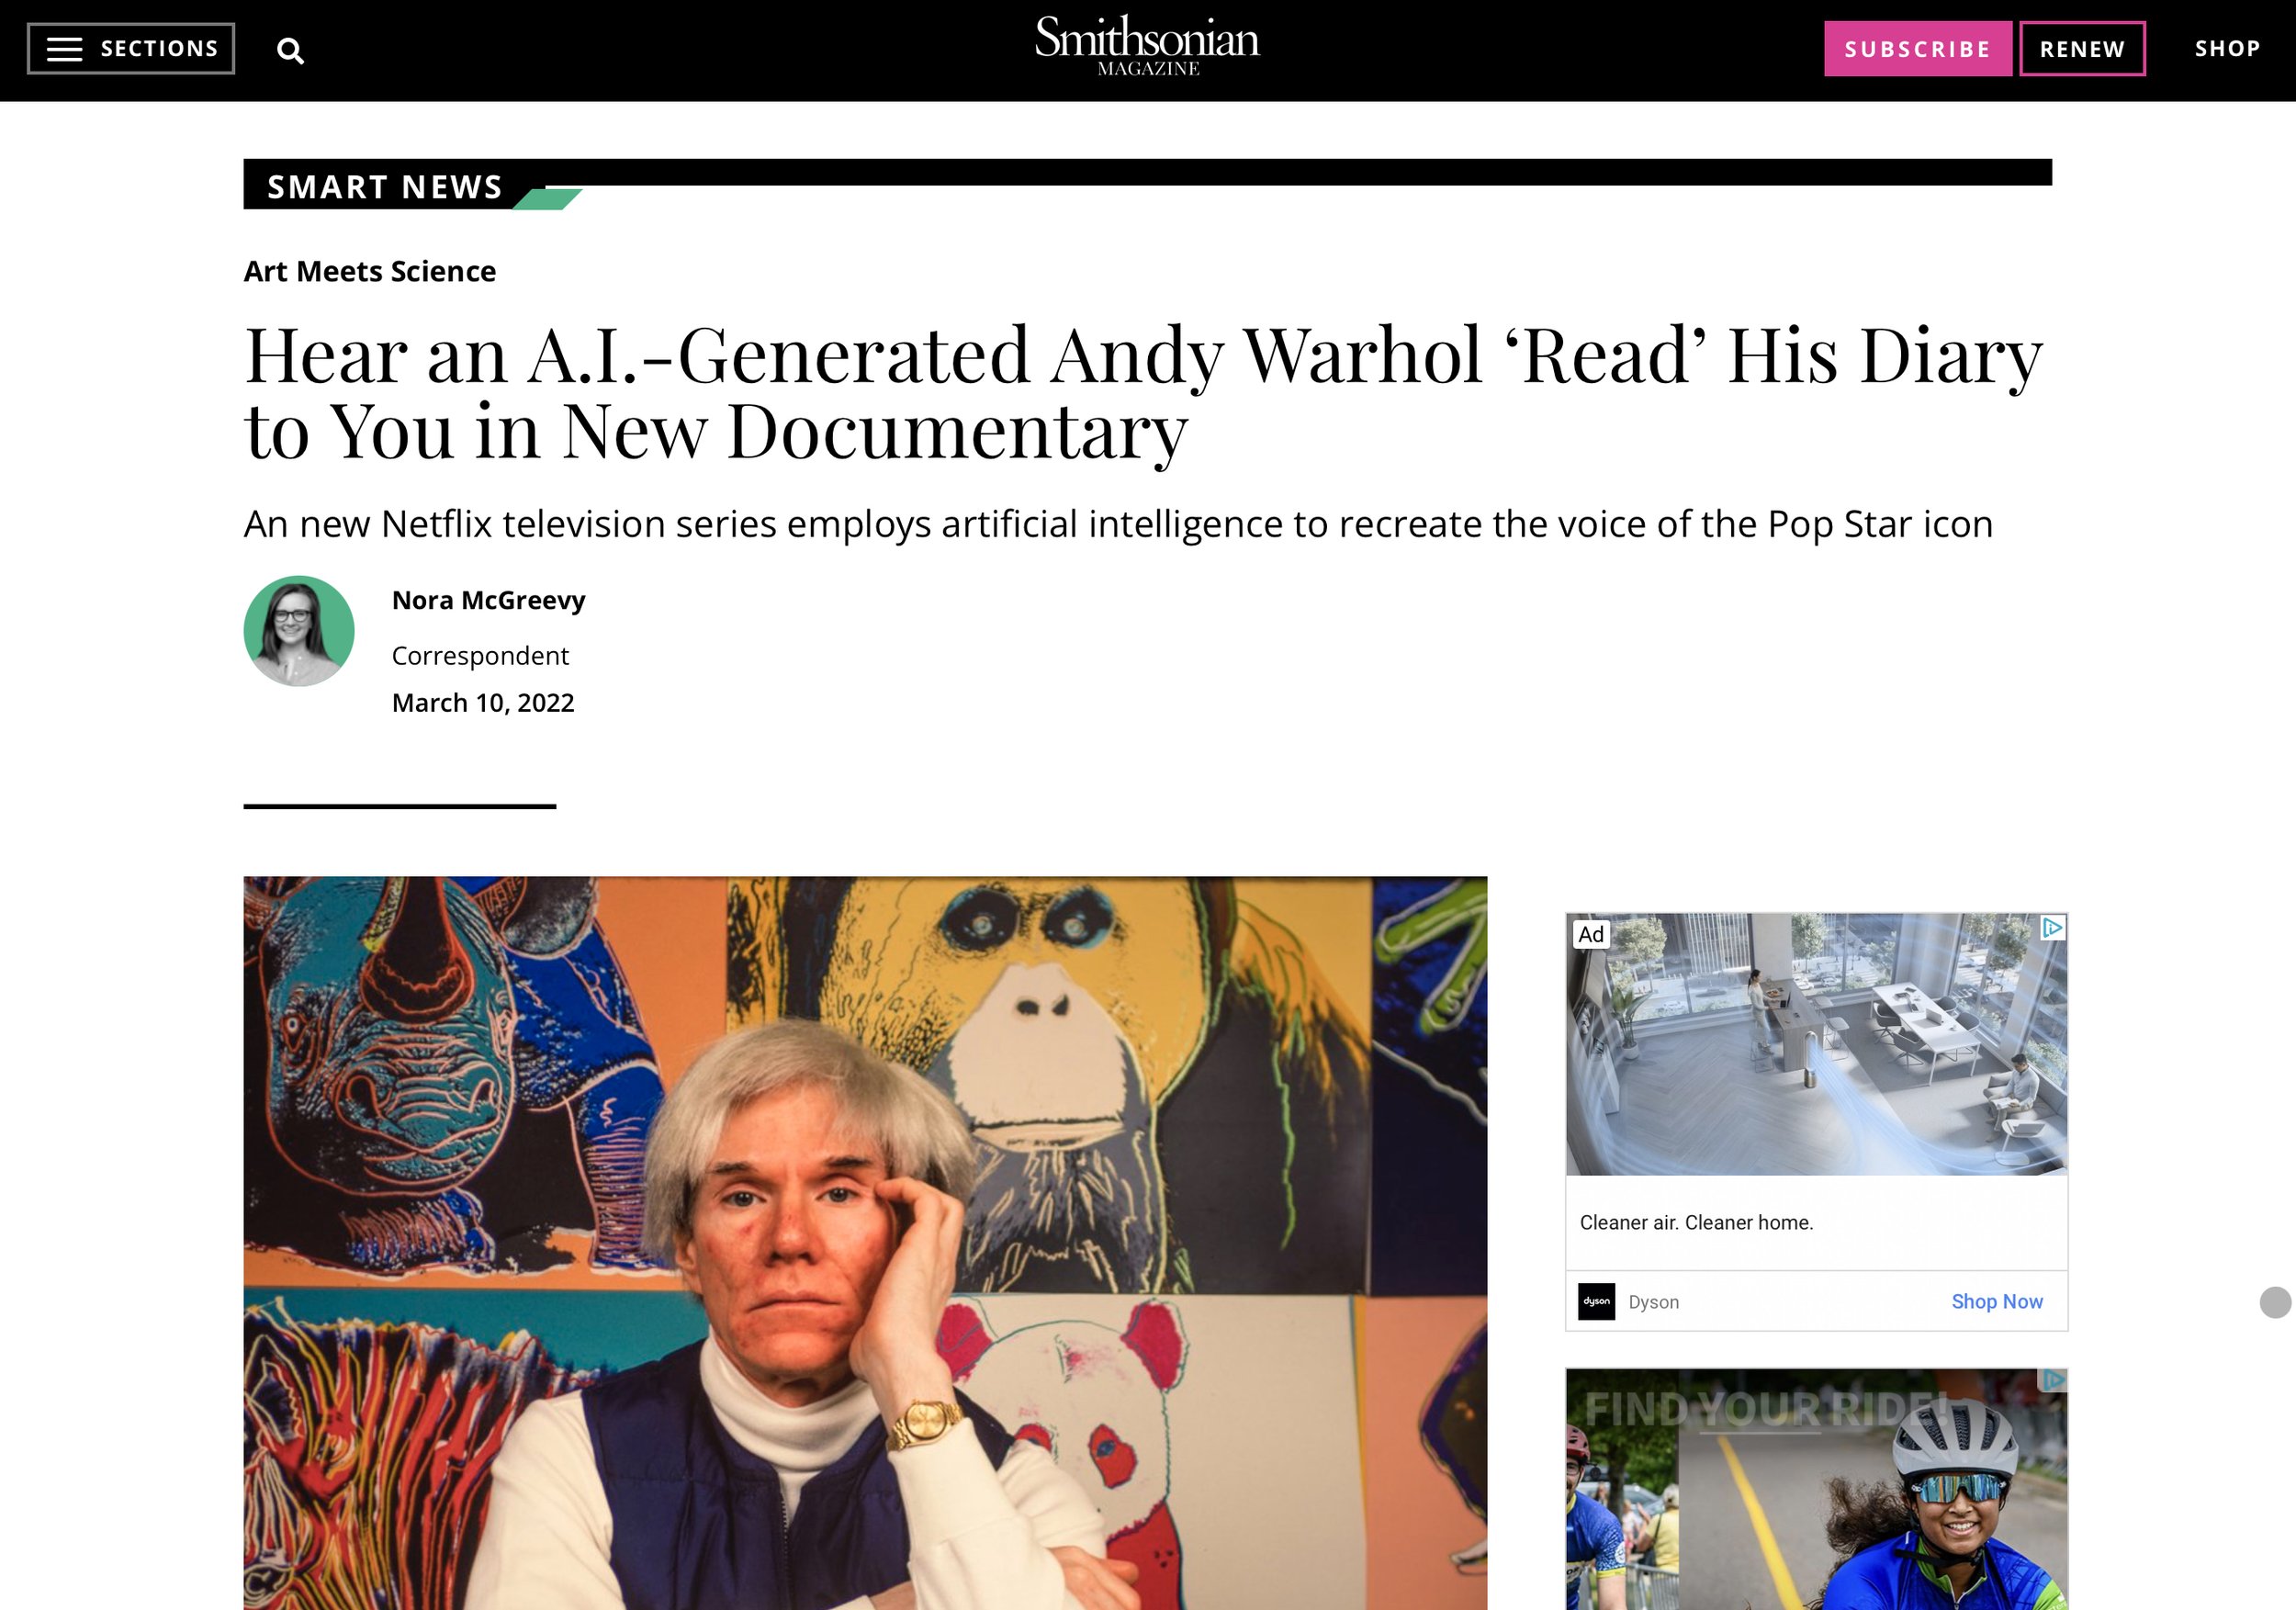 Smithsonian Magazine discusses the use of AI in The Andy Warhol Diaries